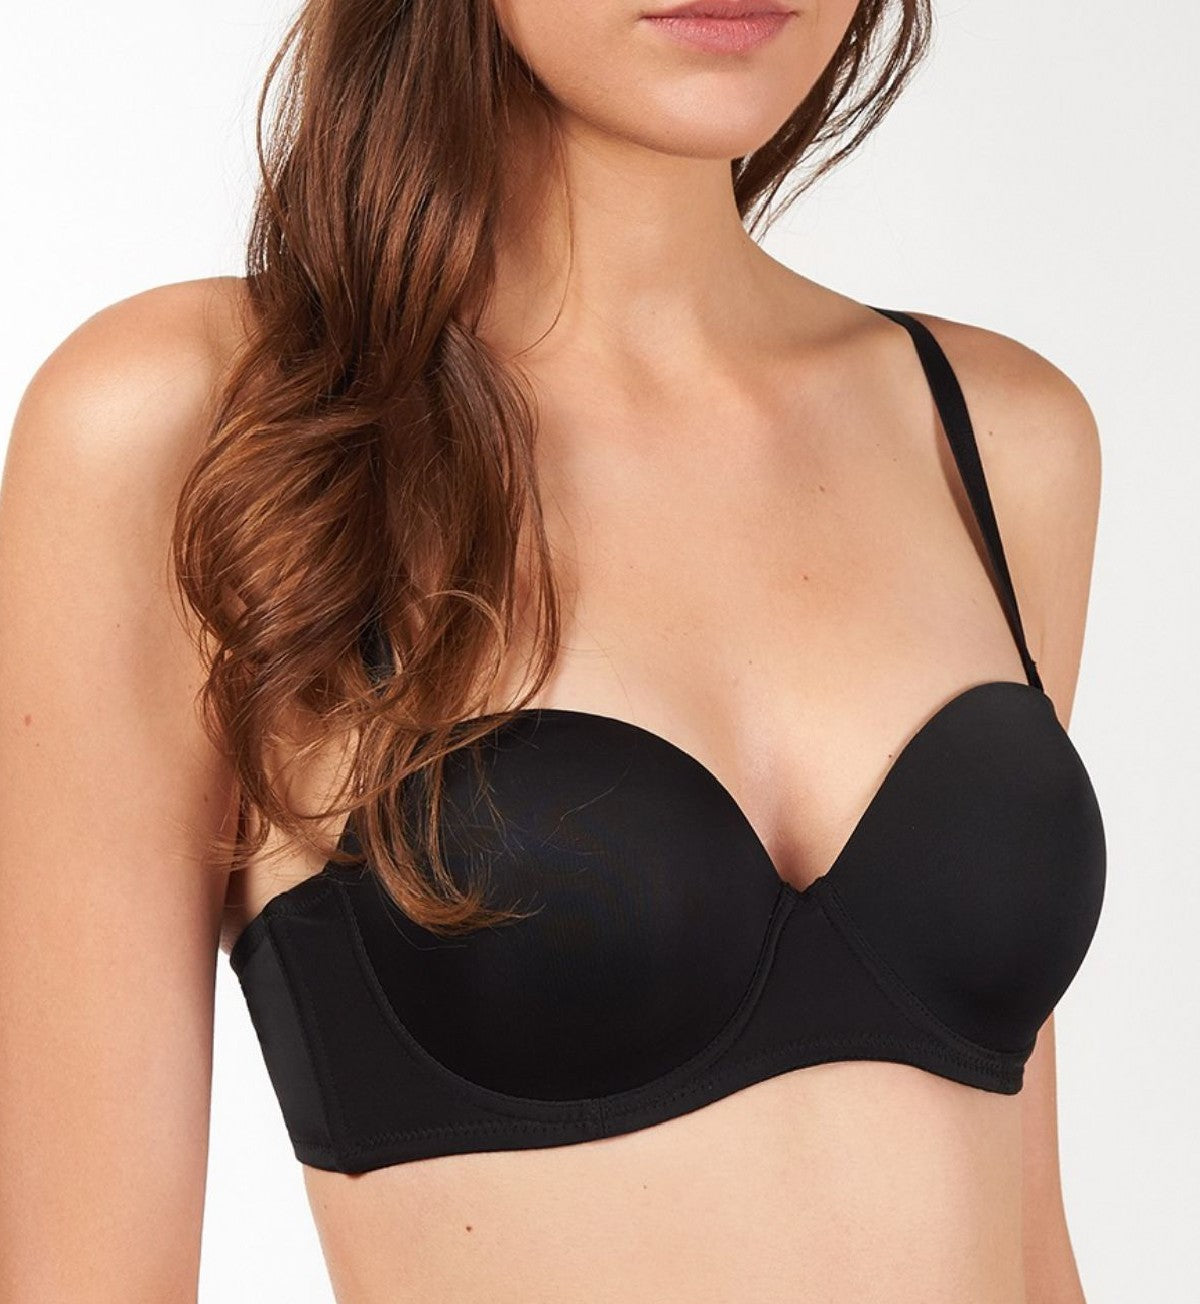 Everyday Comfortable Bras,3/4 Cup,Straps,Push-Up Glossy Brassiere,100%  Silk,真丝文胸